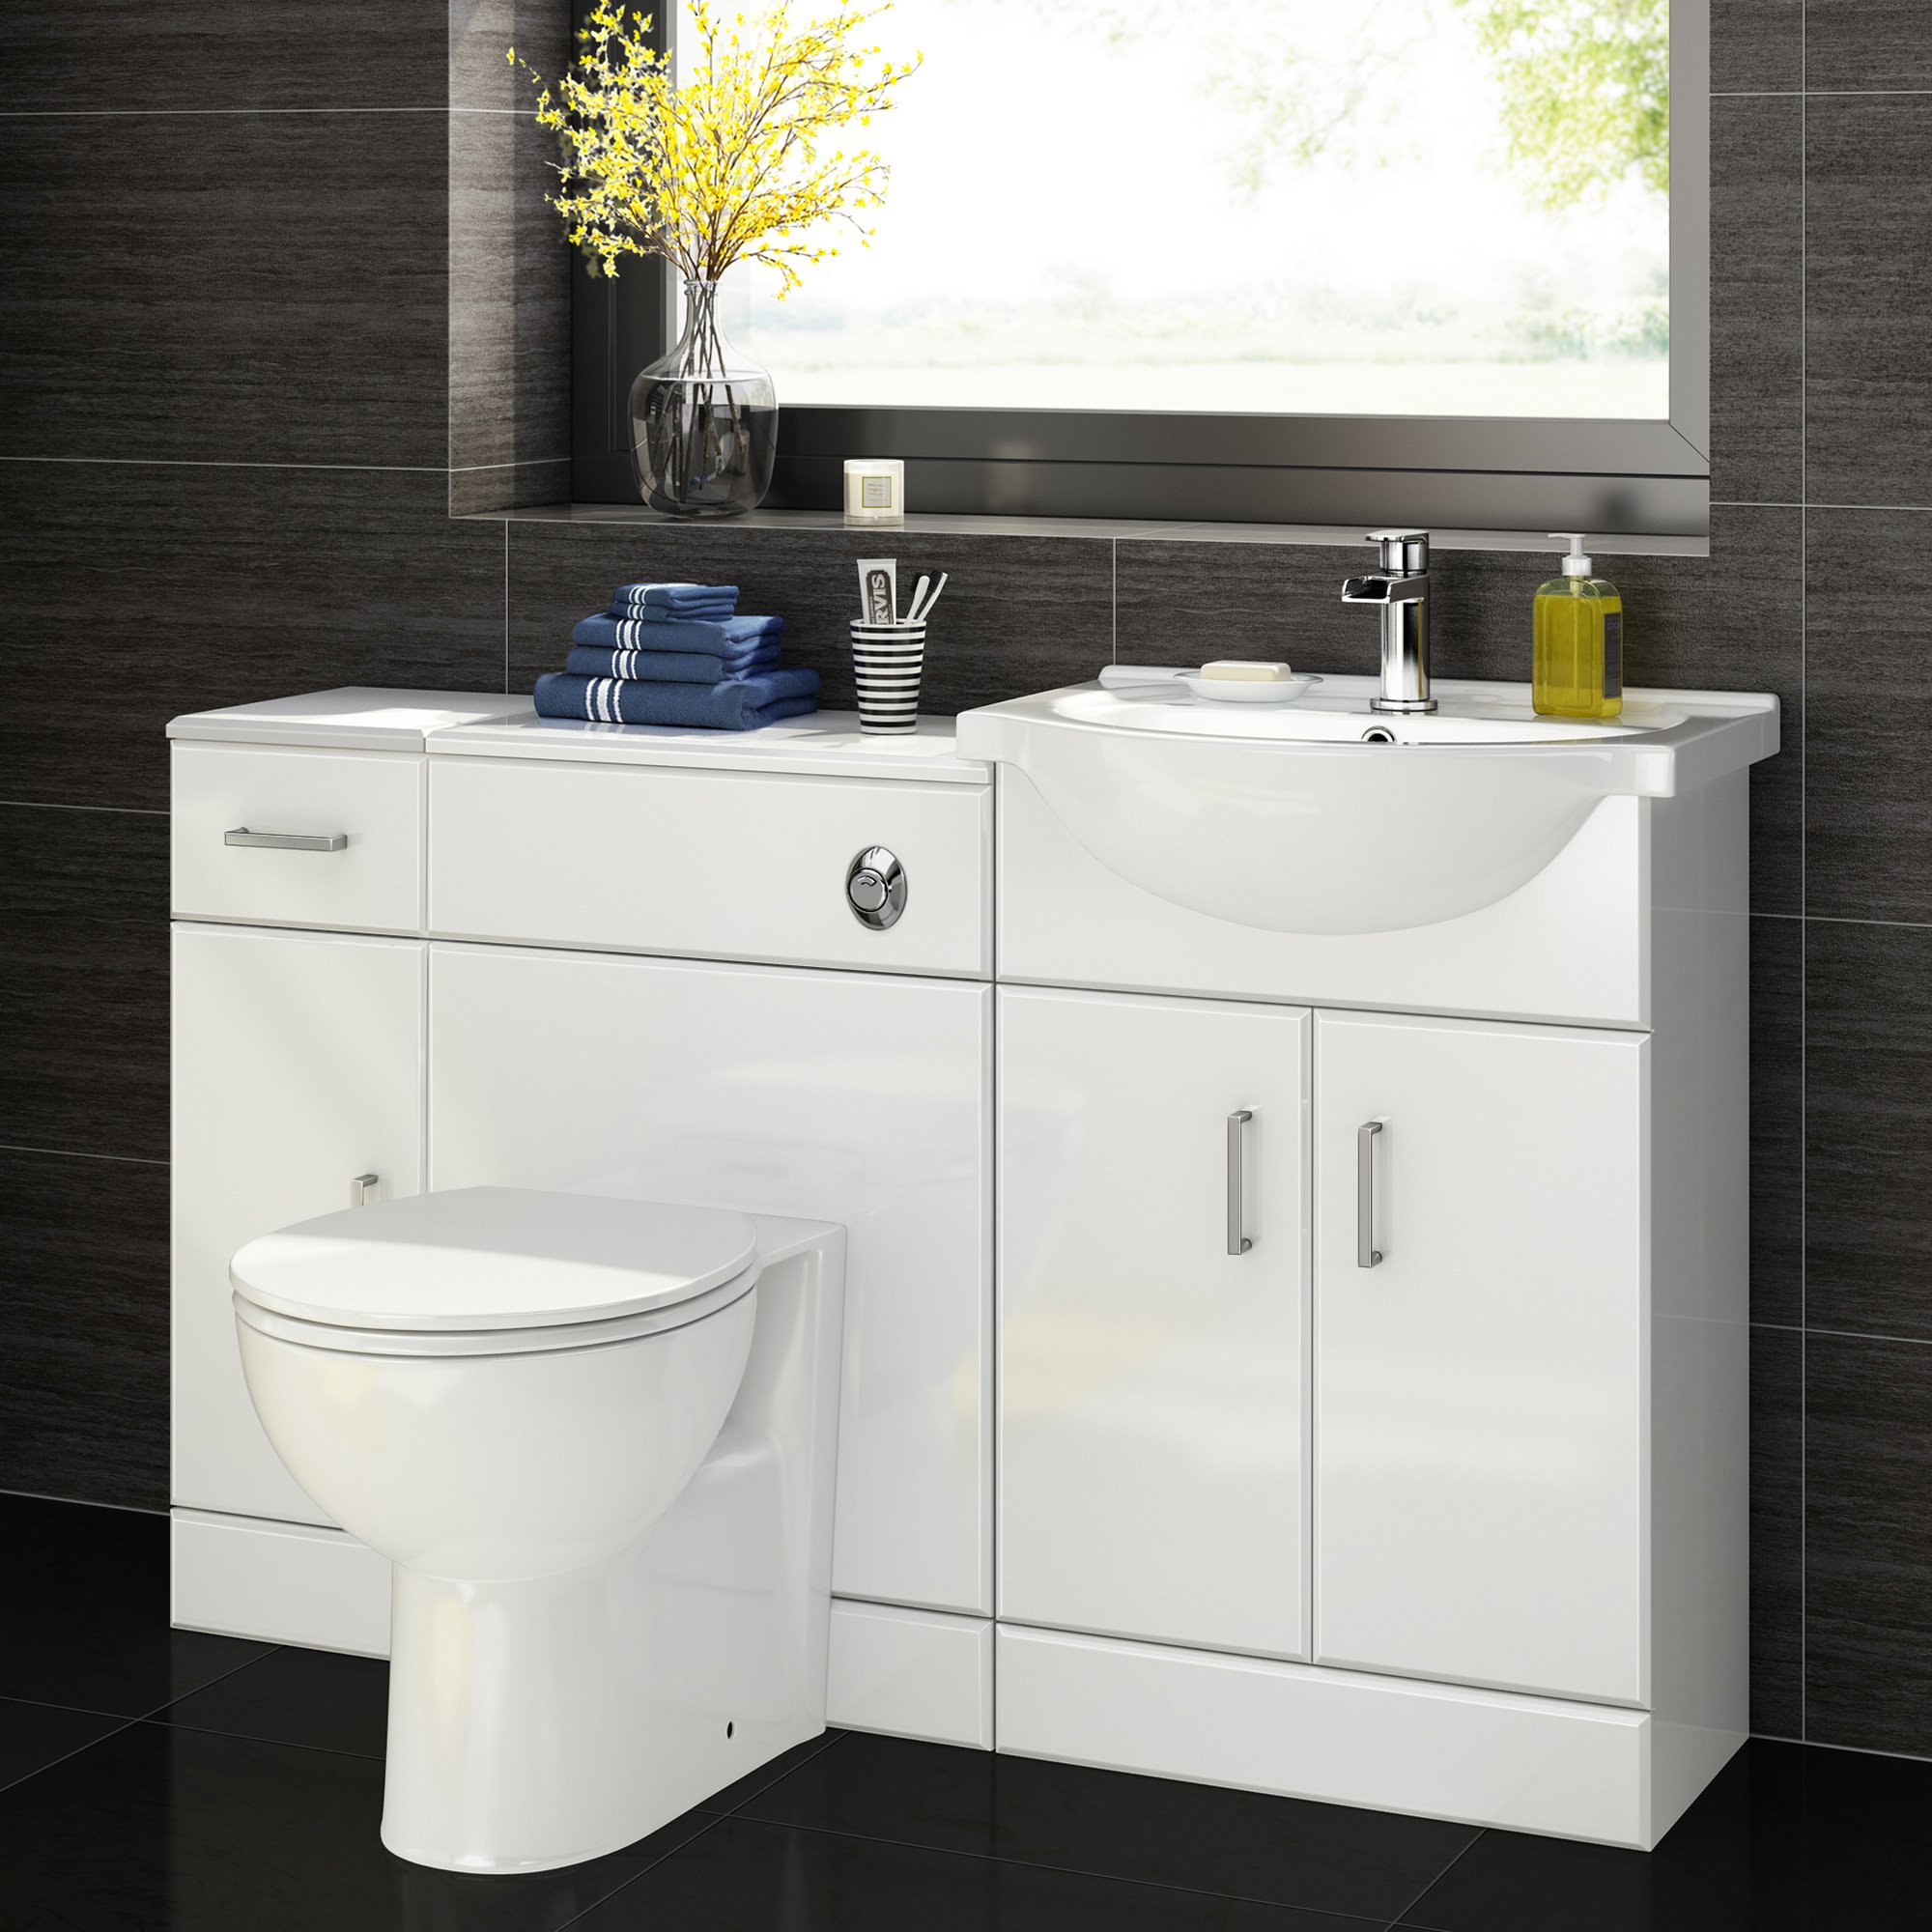 bathroom toilet and sink furniture 1200mm white vanity unit back to wall toilet bathroom sink furniture